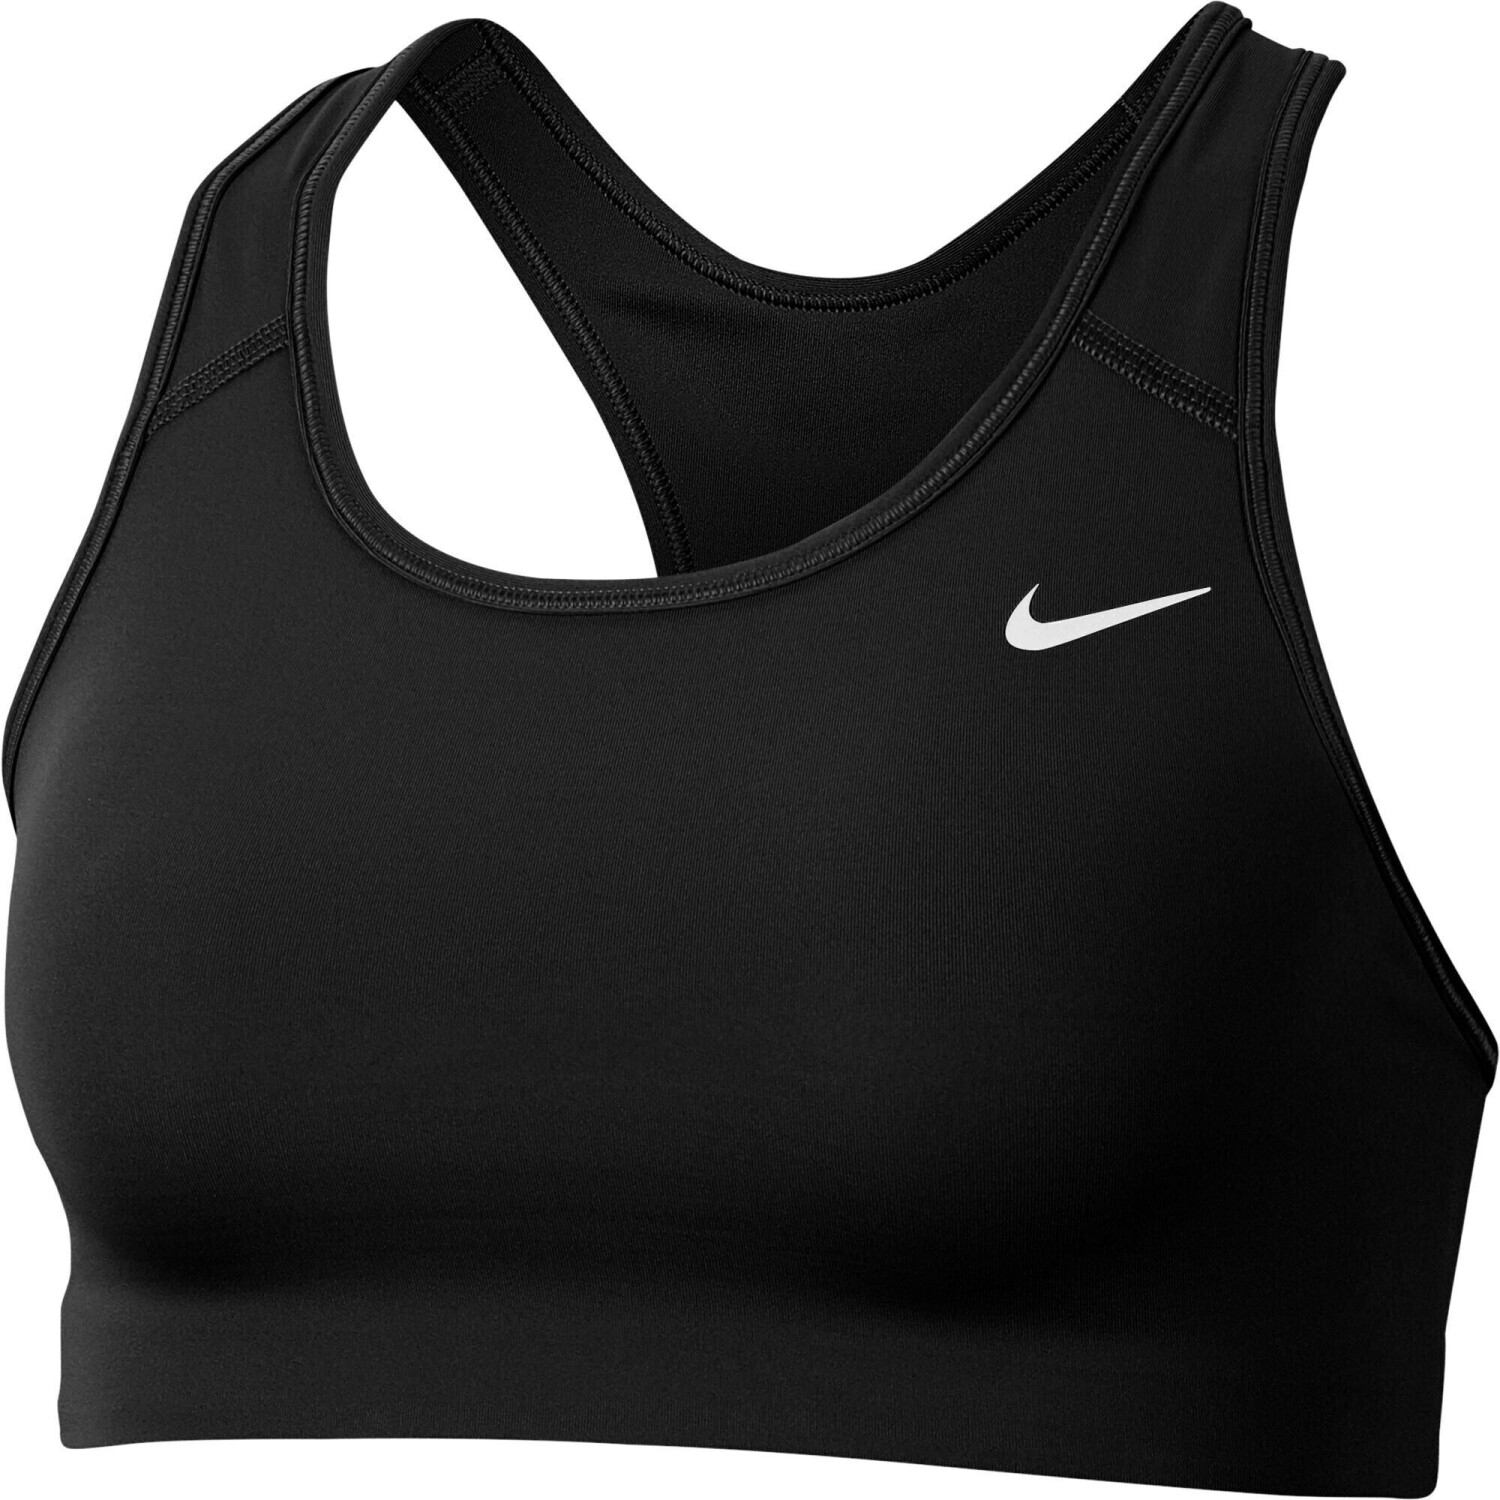 Buy Nike Dri-FIT Swoosh (BV3630) from £10.50 (Today) – Best